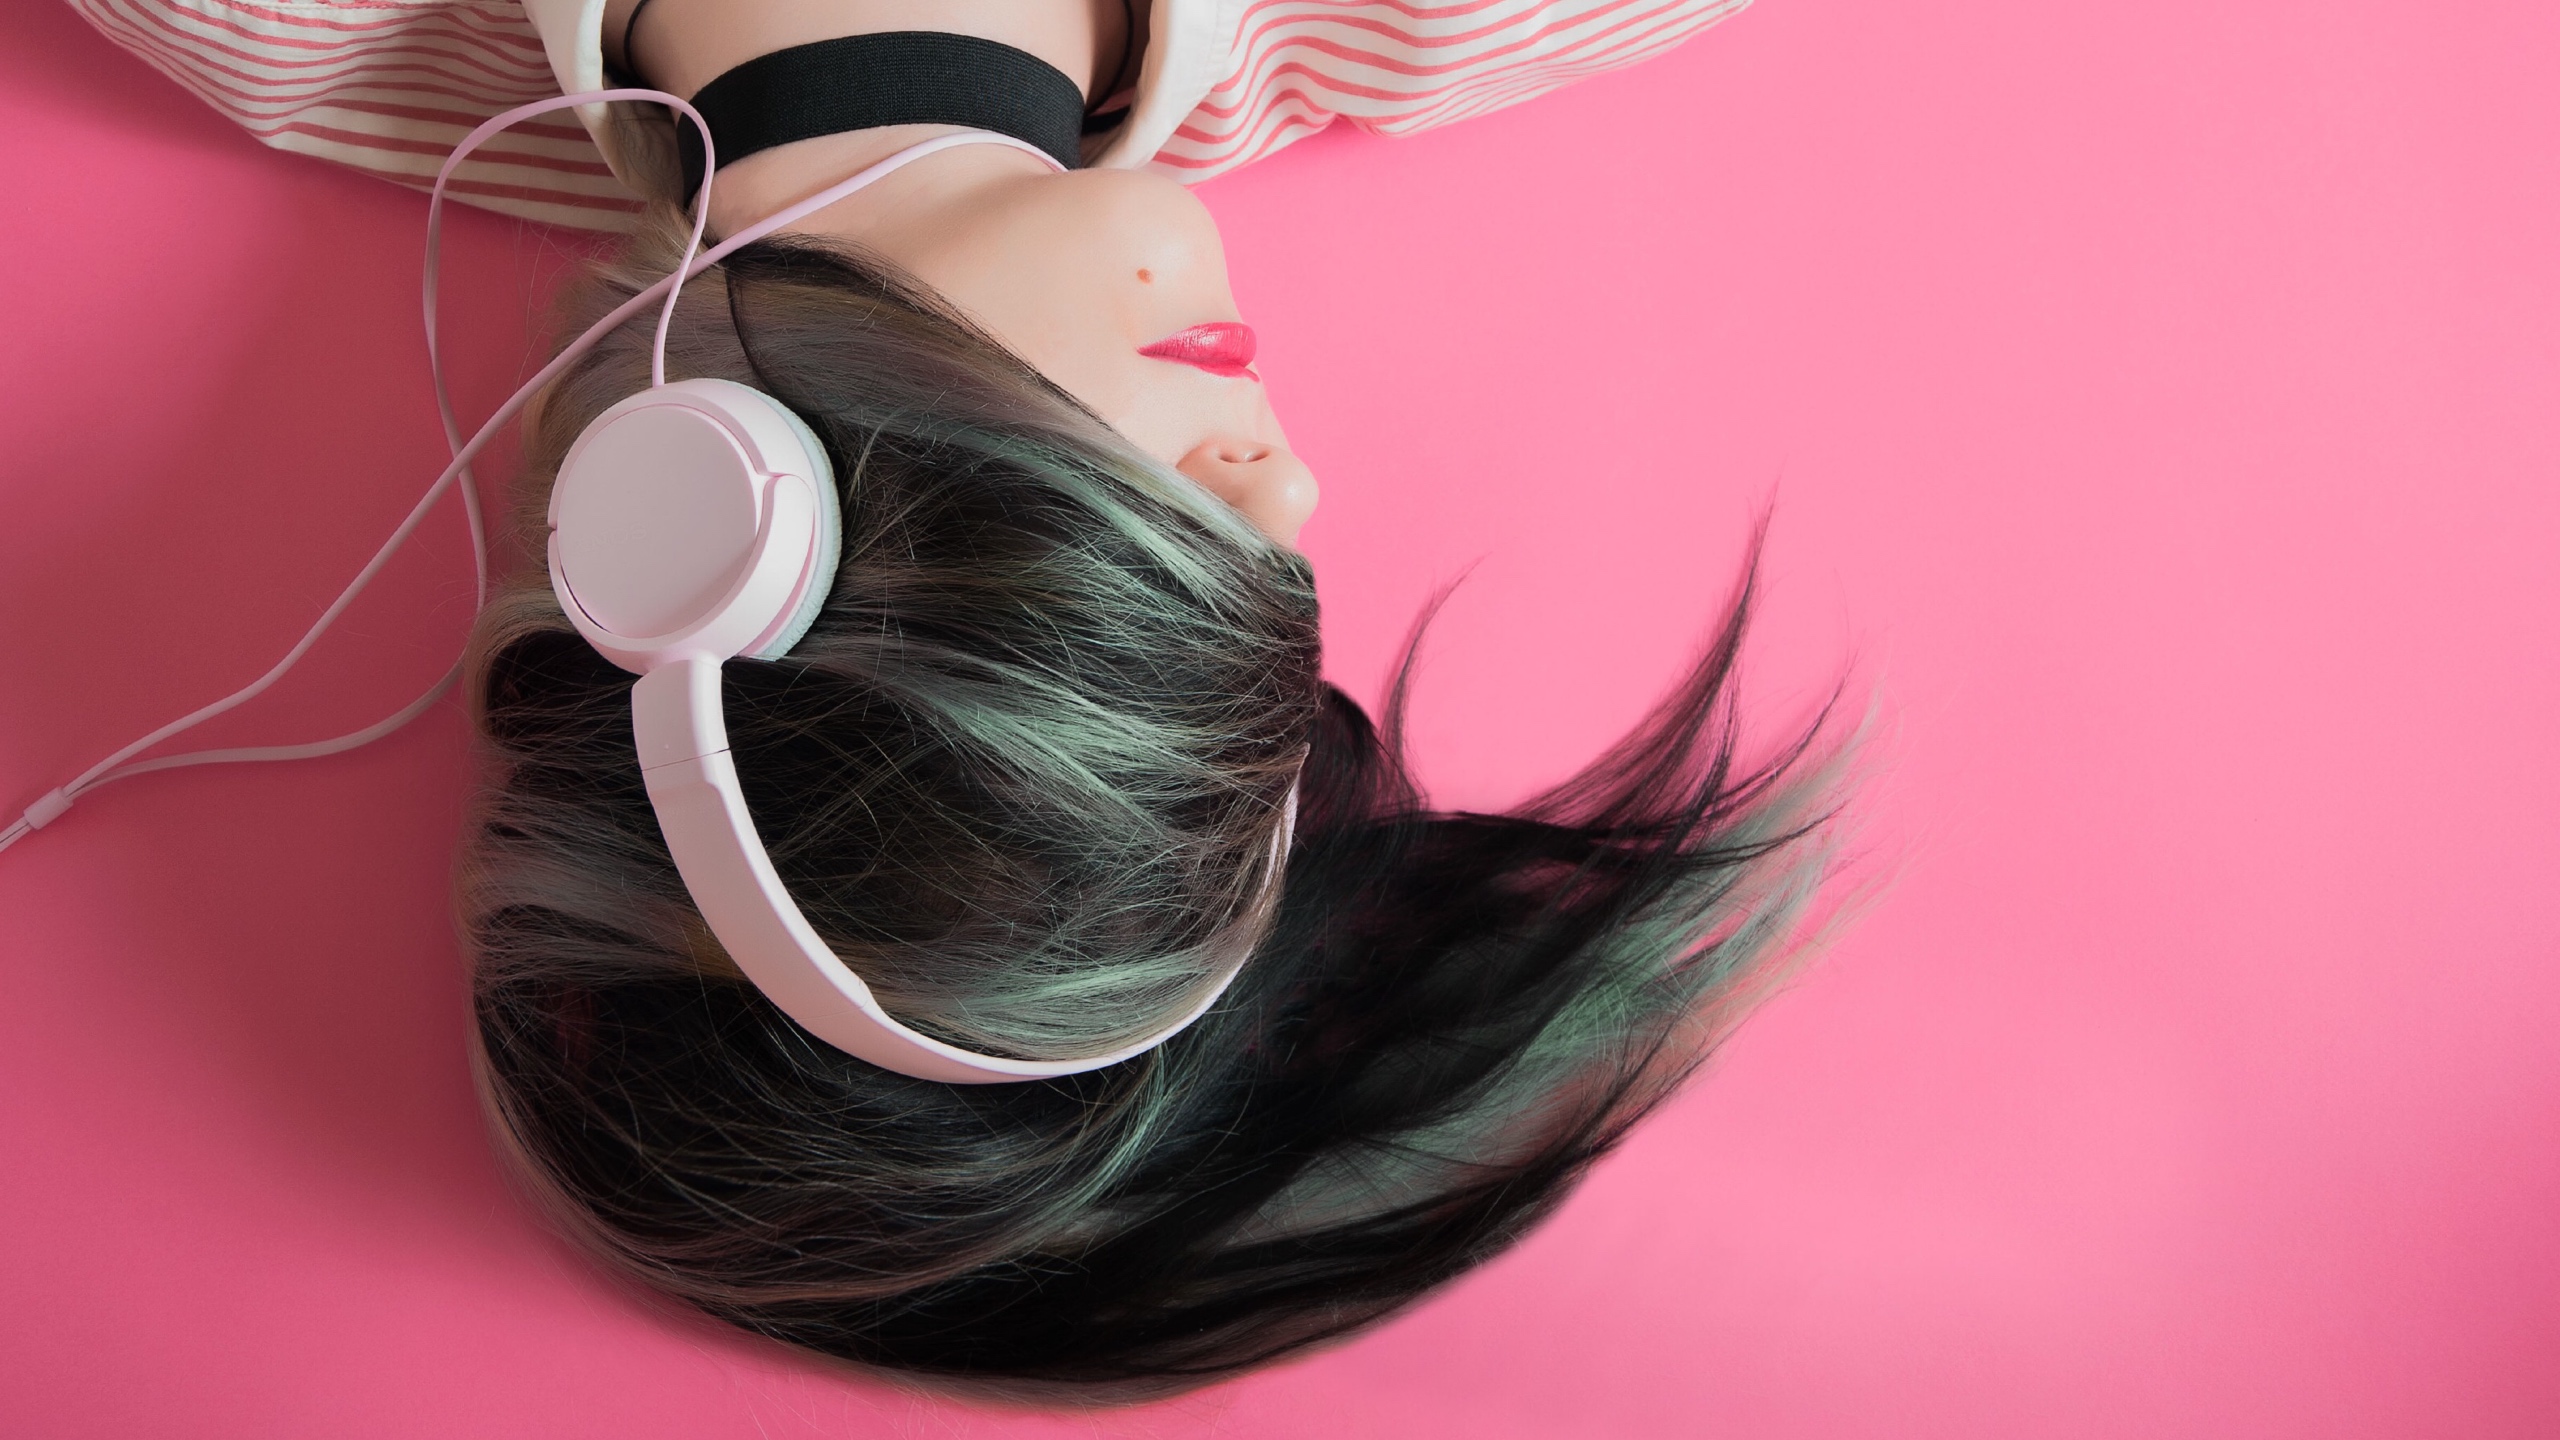 7 Songs for Your Self-Love Playlist